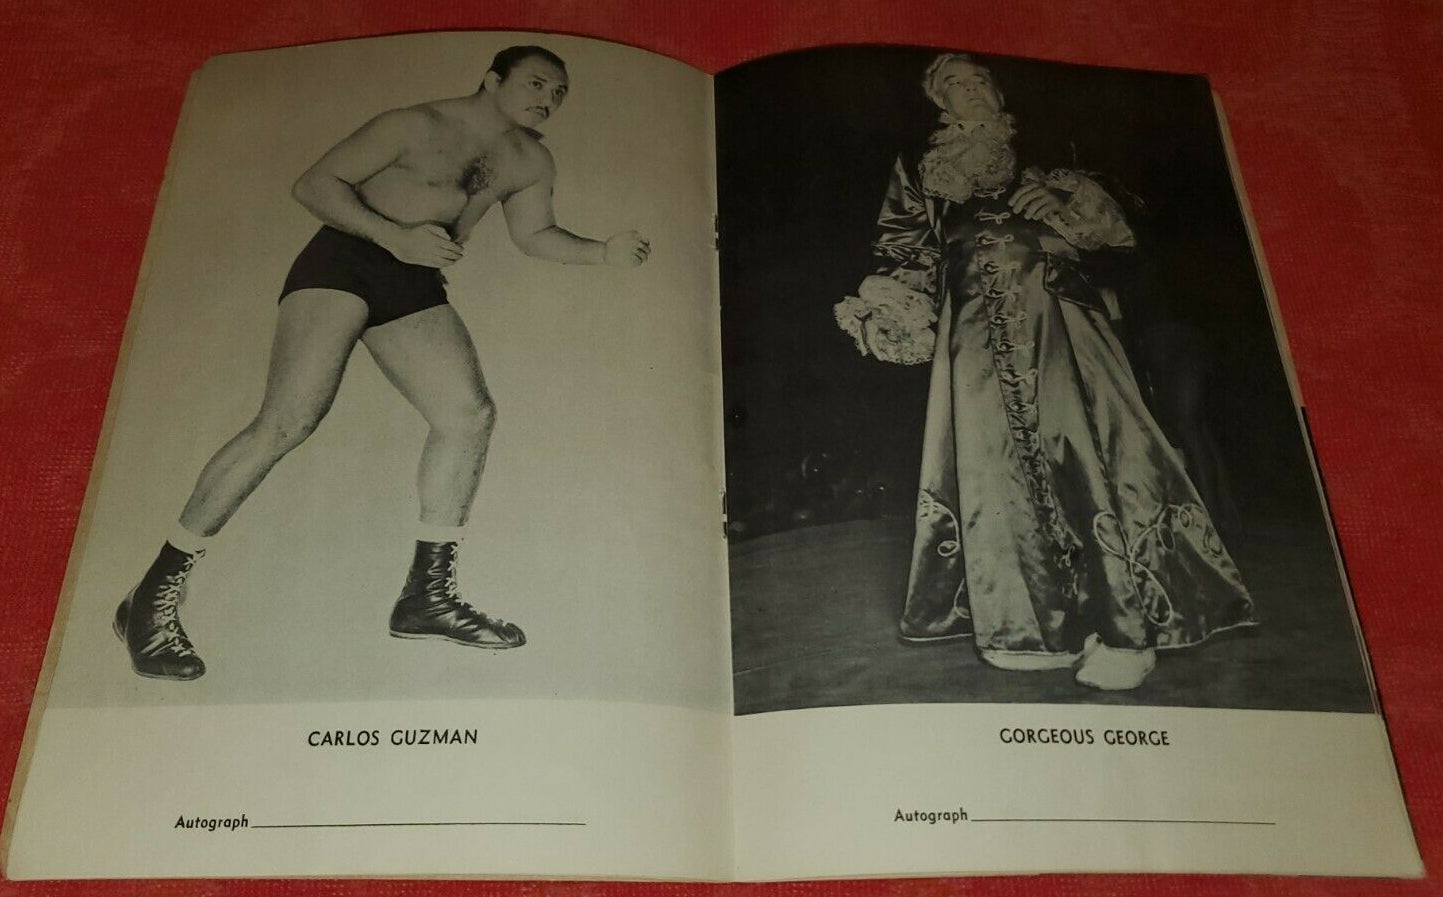 VW2 Extremely Rare 1949 Tops in Wrestling Autograph book